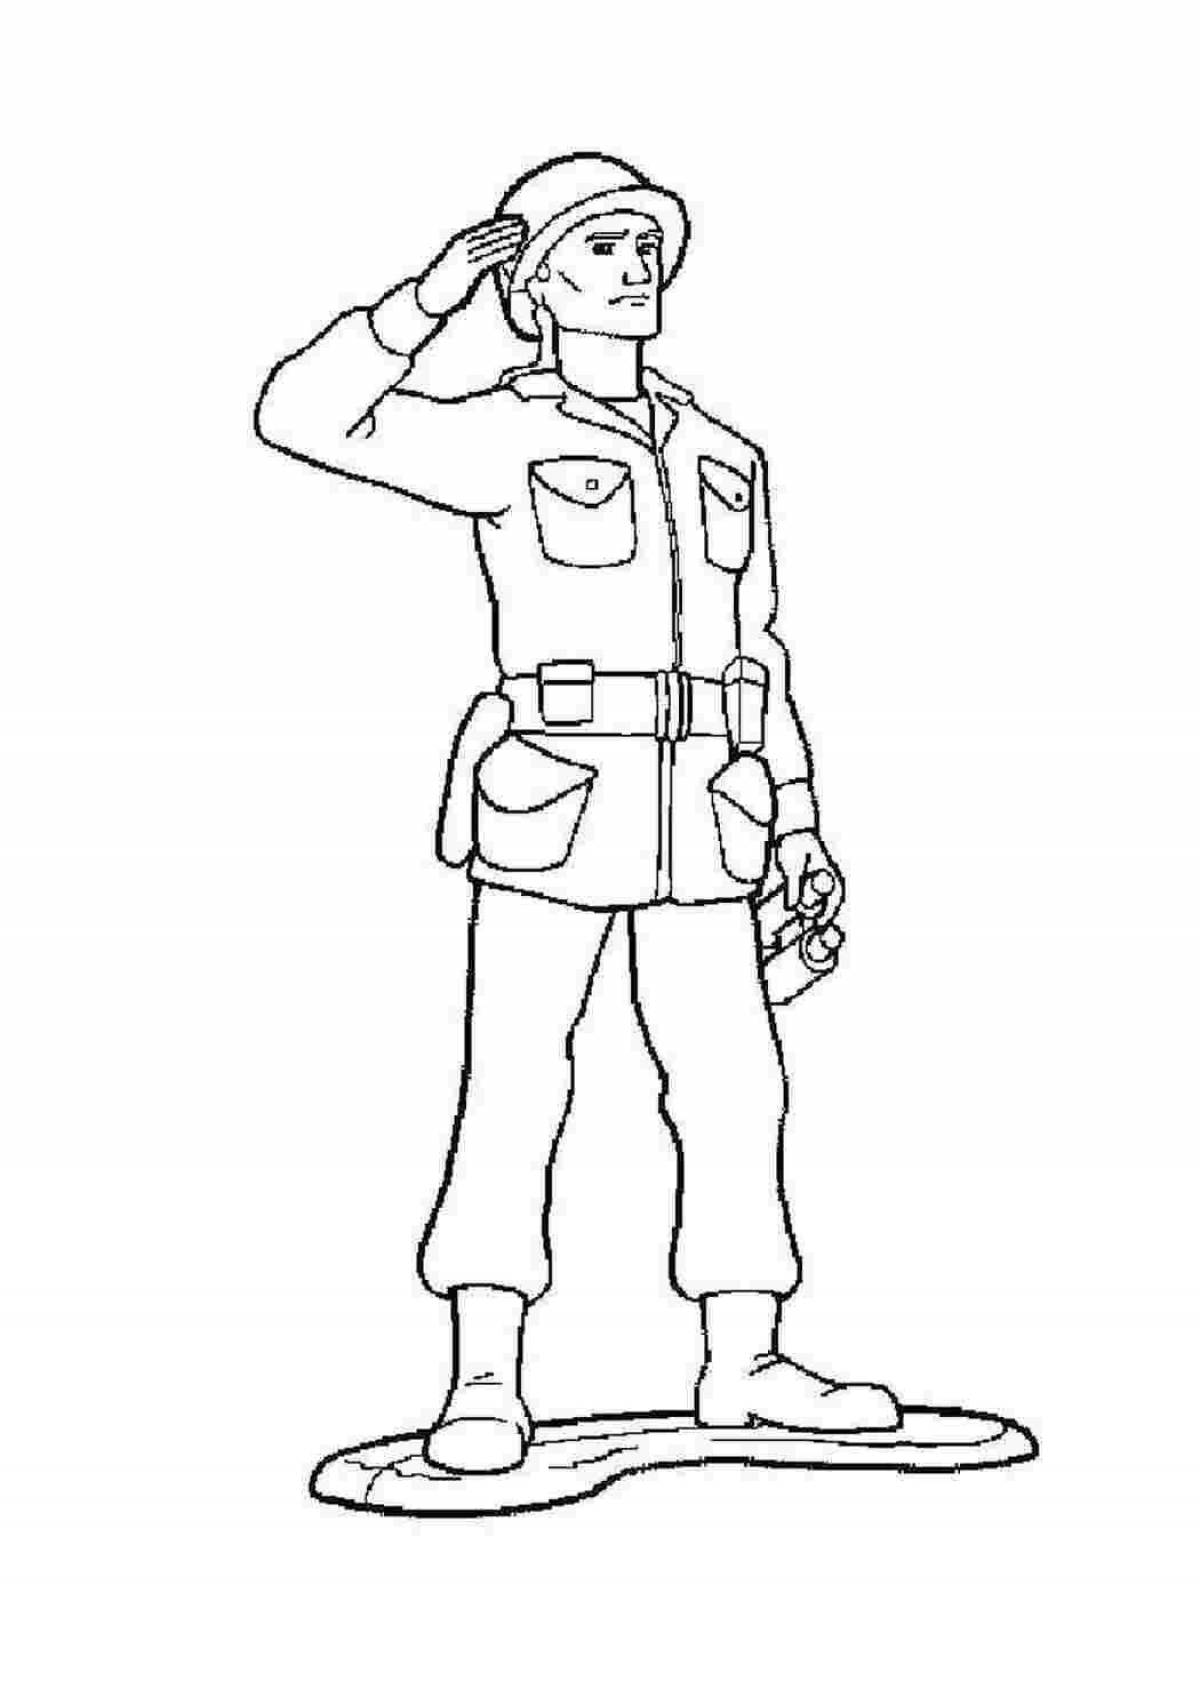 Soldier and child drawing #4